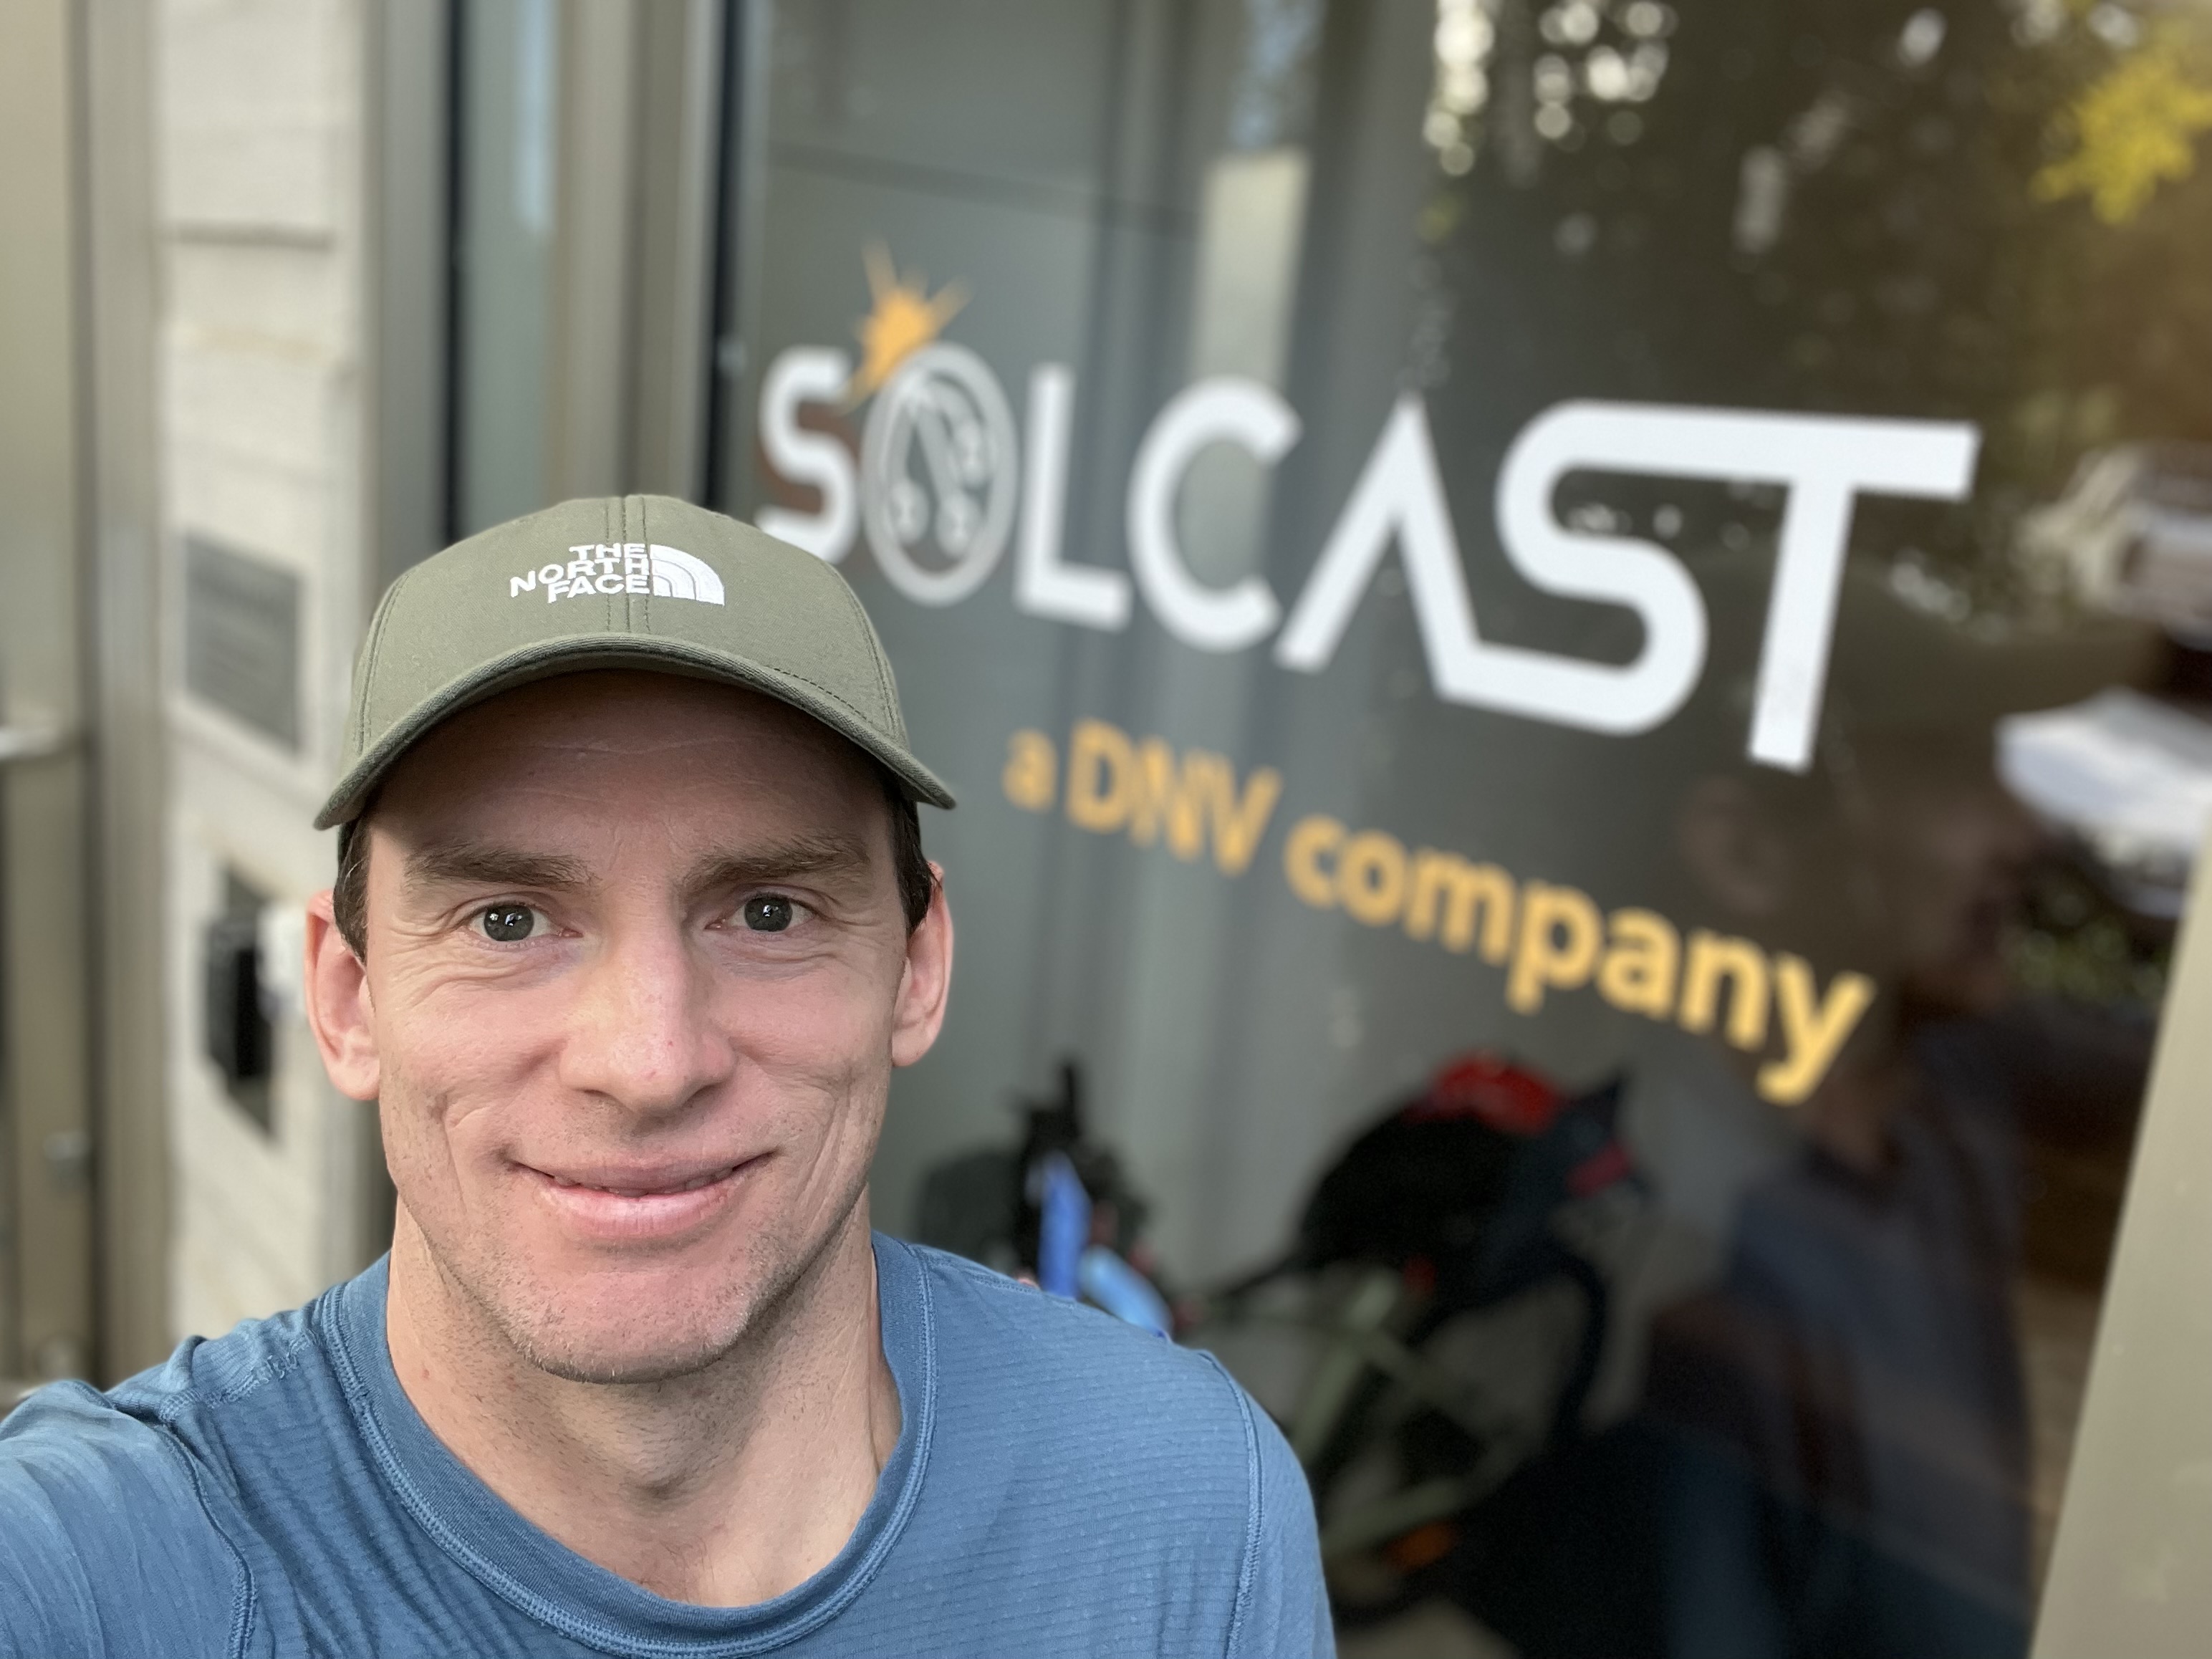 Why did Solcast choose DNV?